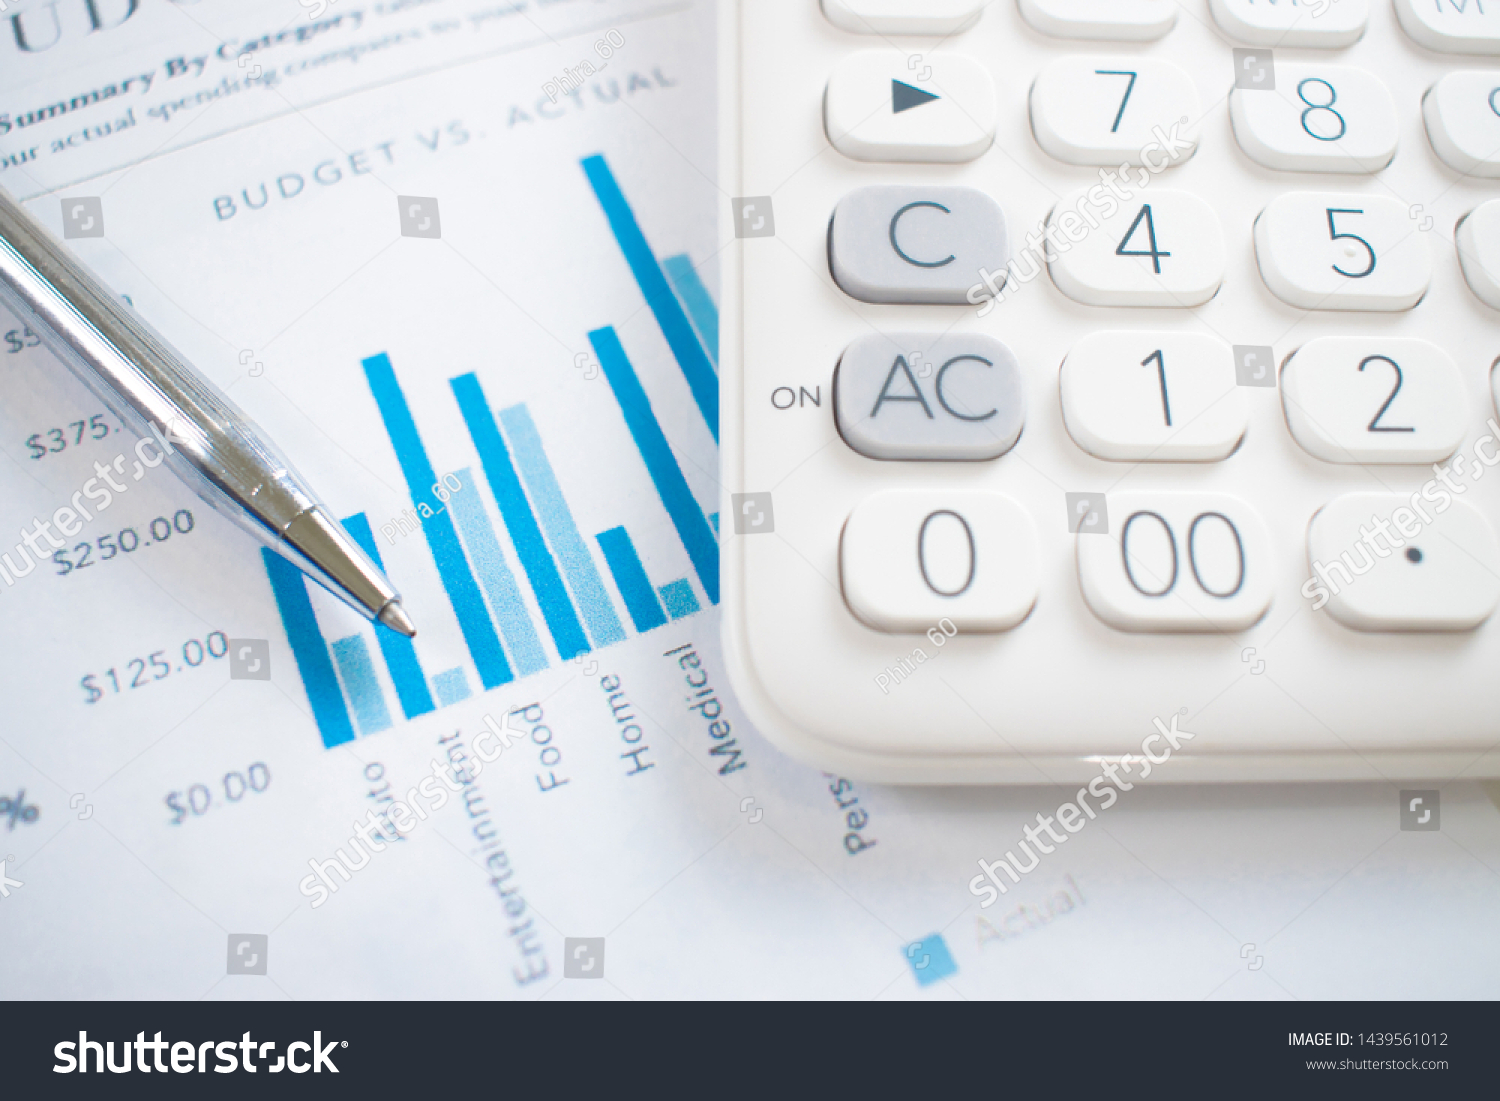 Calculator on the graph with the lowest graphing pen Financial graph business concept #1439561012